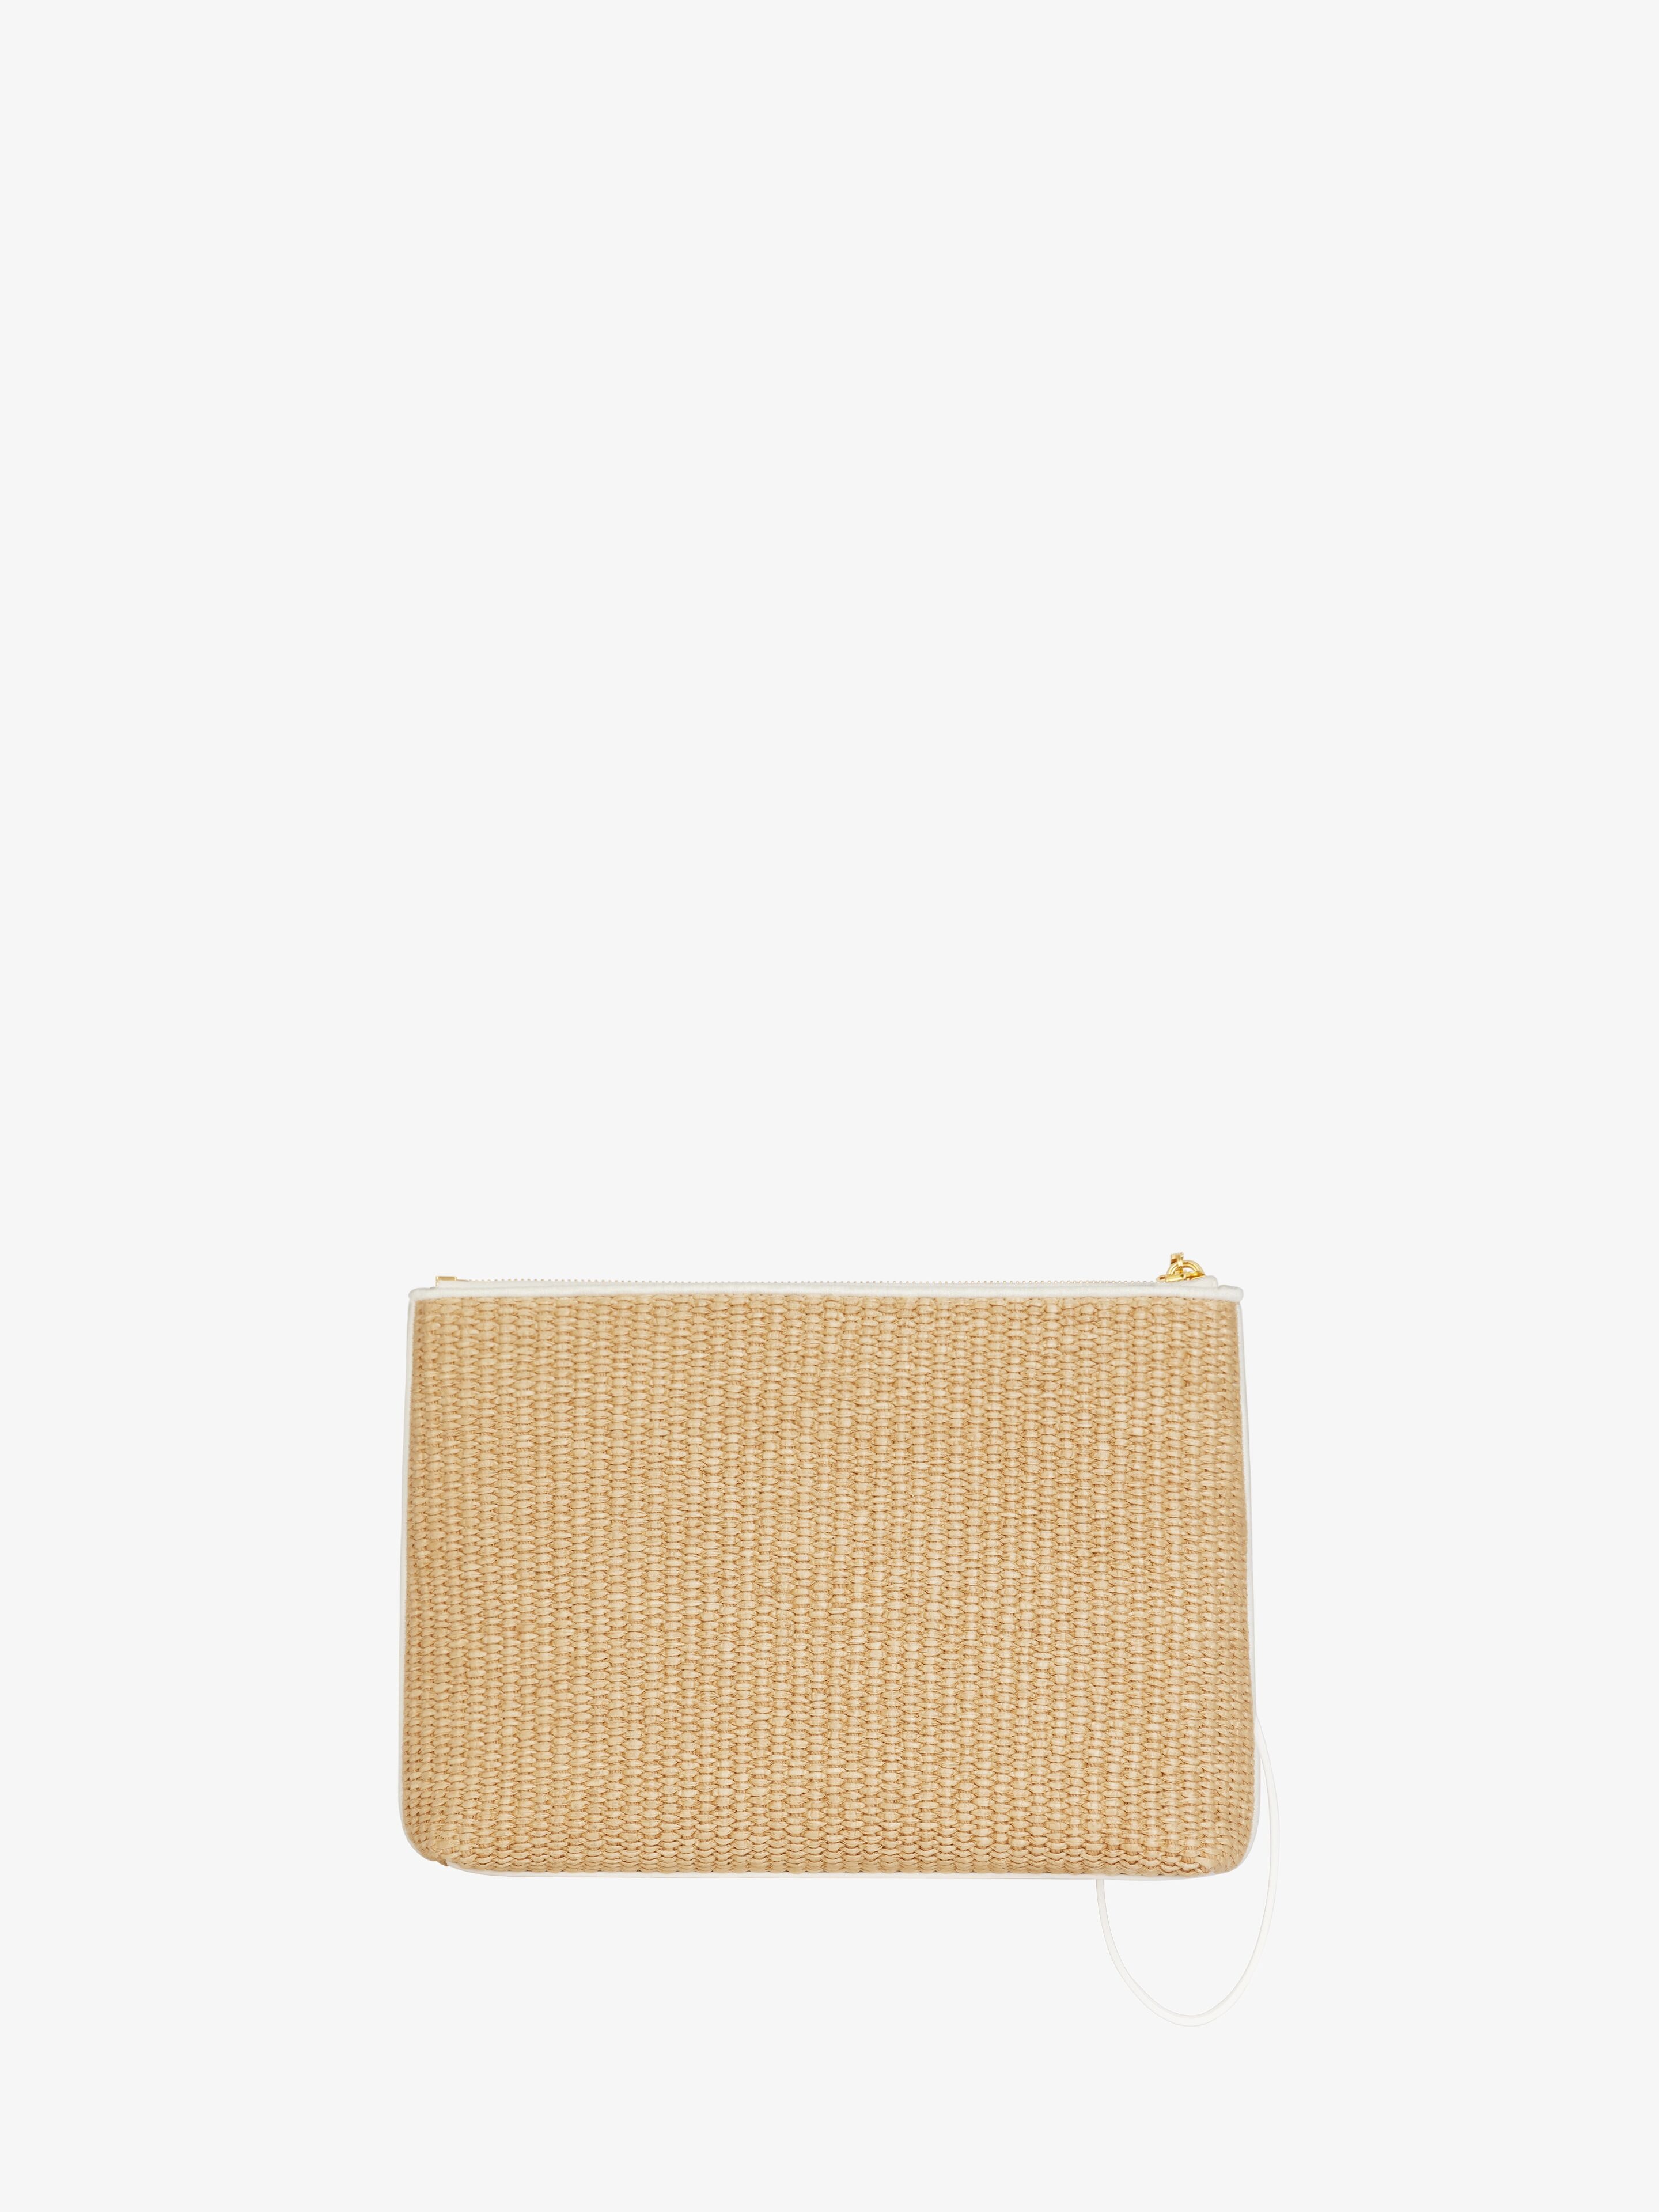 GIVENCHY TRAVEL POUCH IN RAFFIA - 3